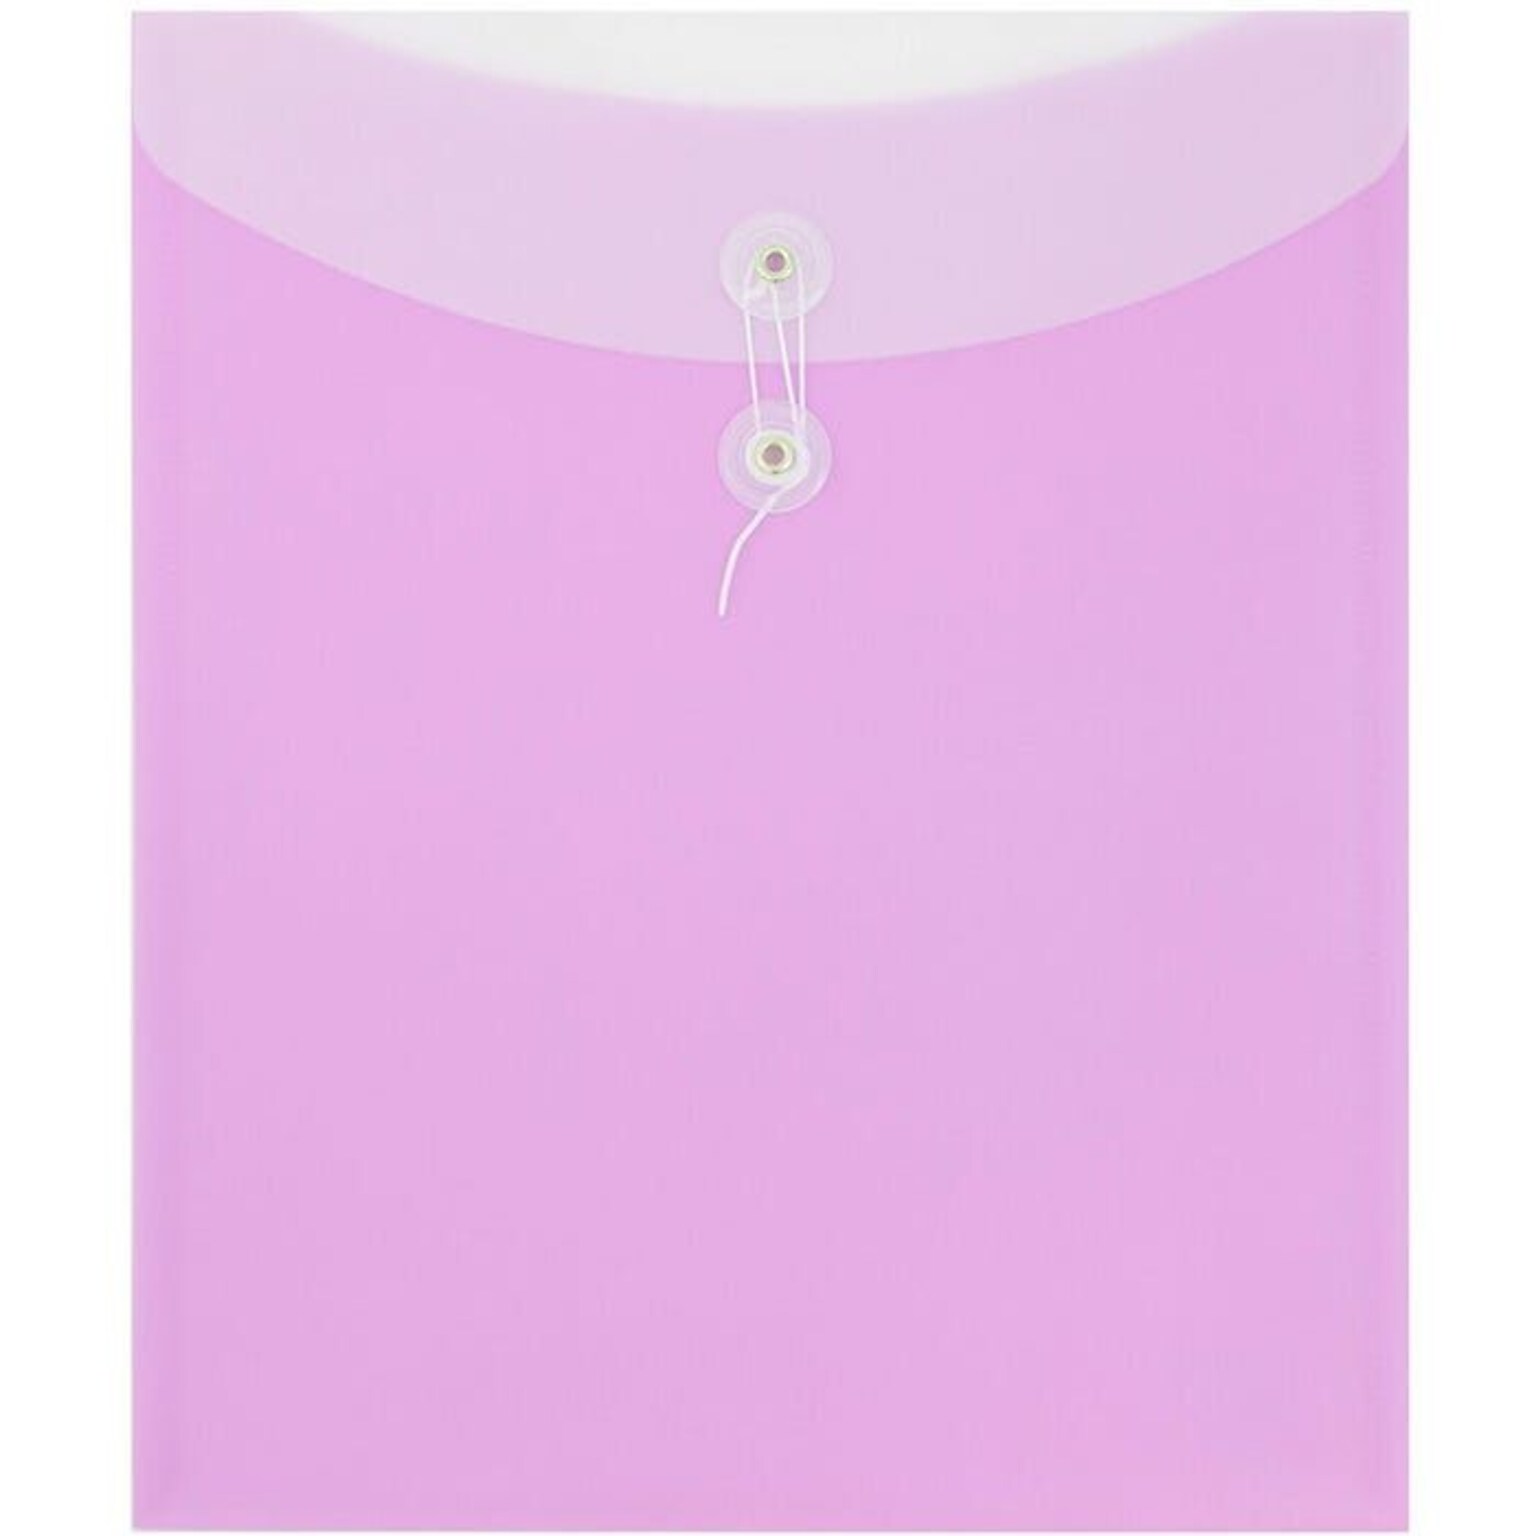 JAM PAPER Plastic Envelopes with Button & String Tie Closure, Letter Open End, 9 1/2 x 12, Two-Tone Lilac Purple, 12/Pack